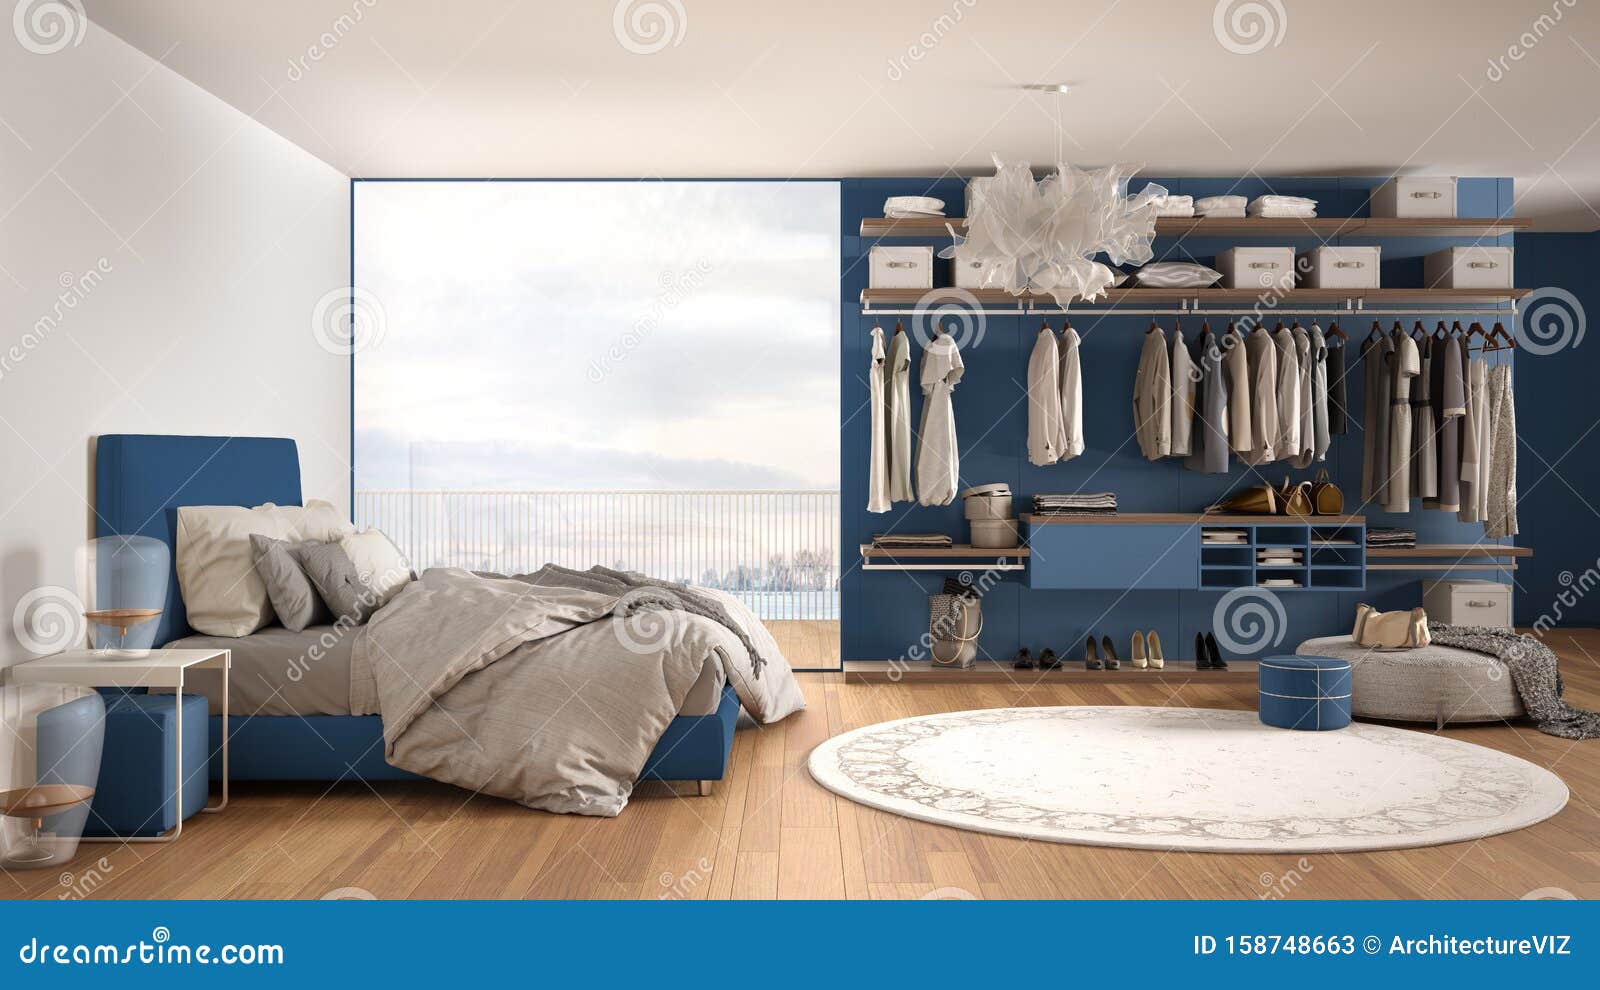 Luxury White And Blue Modern Bedroom With Double Bed And